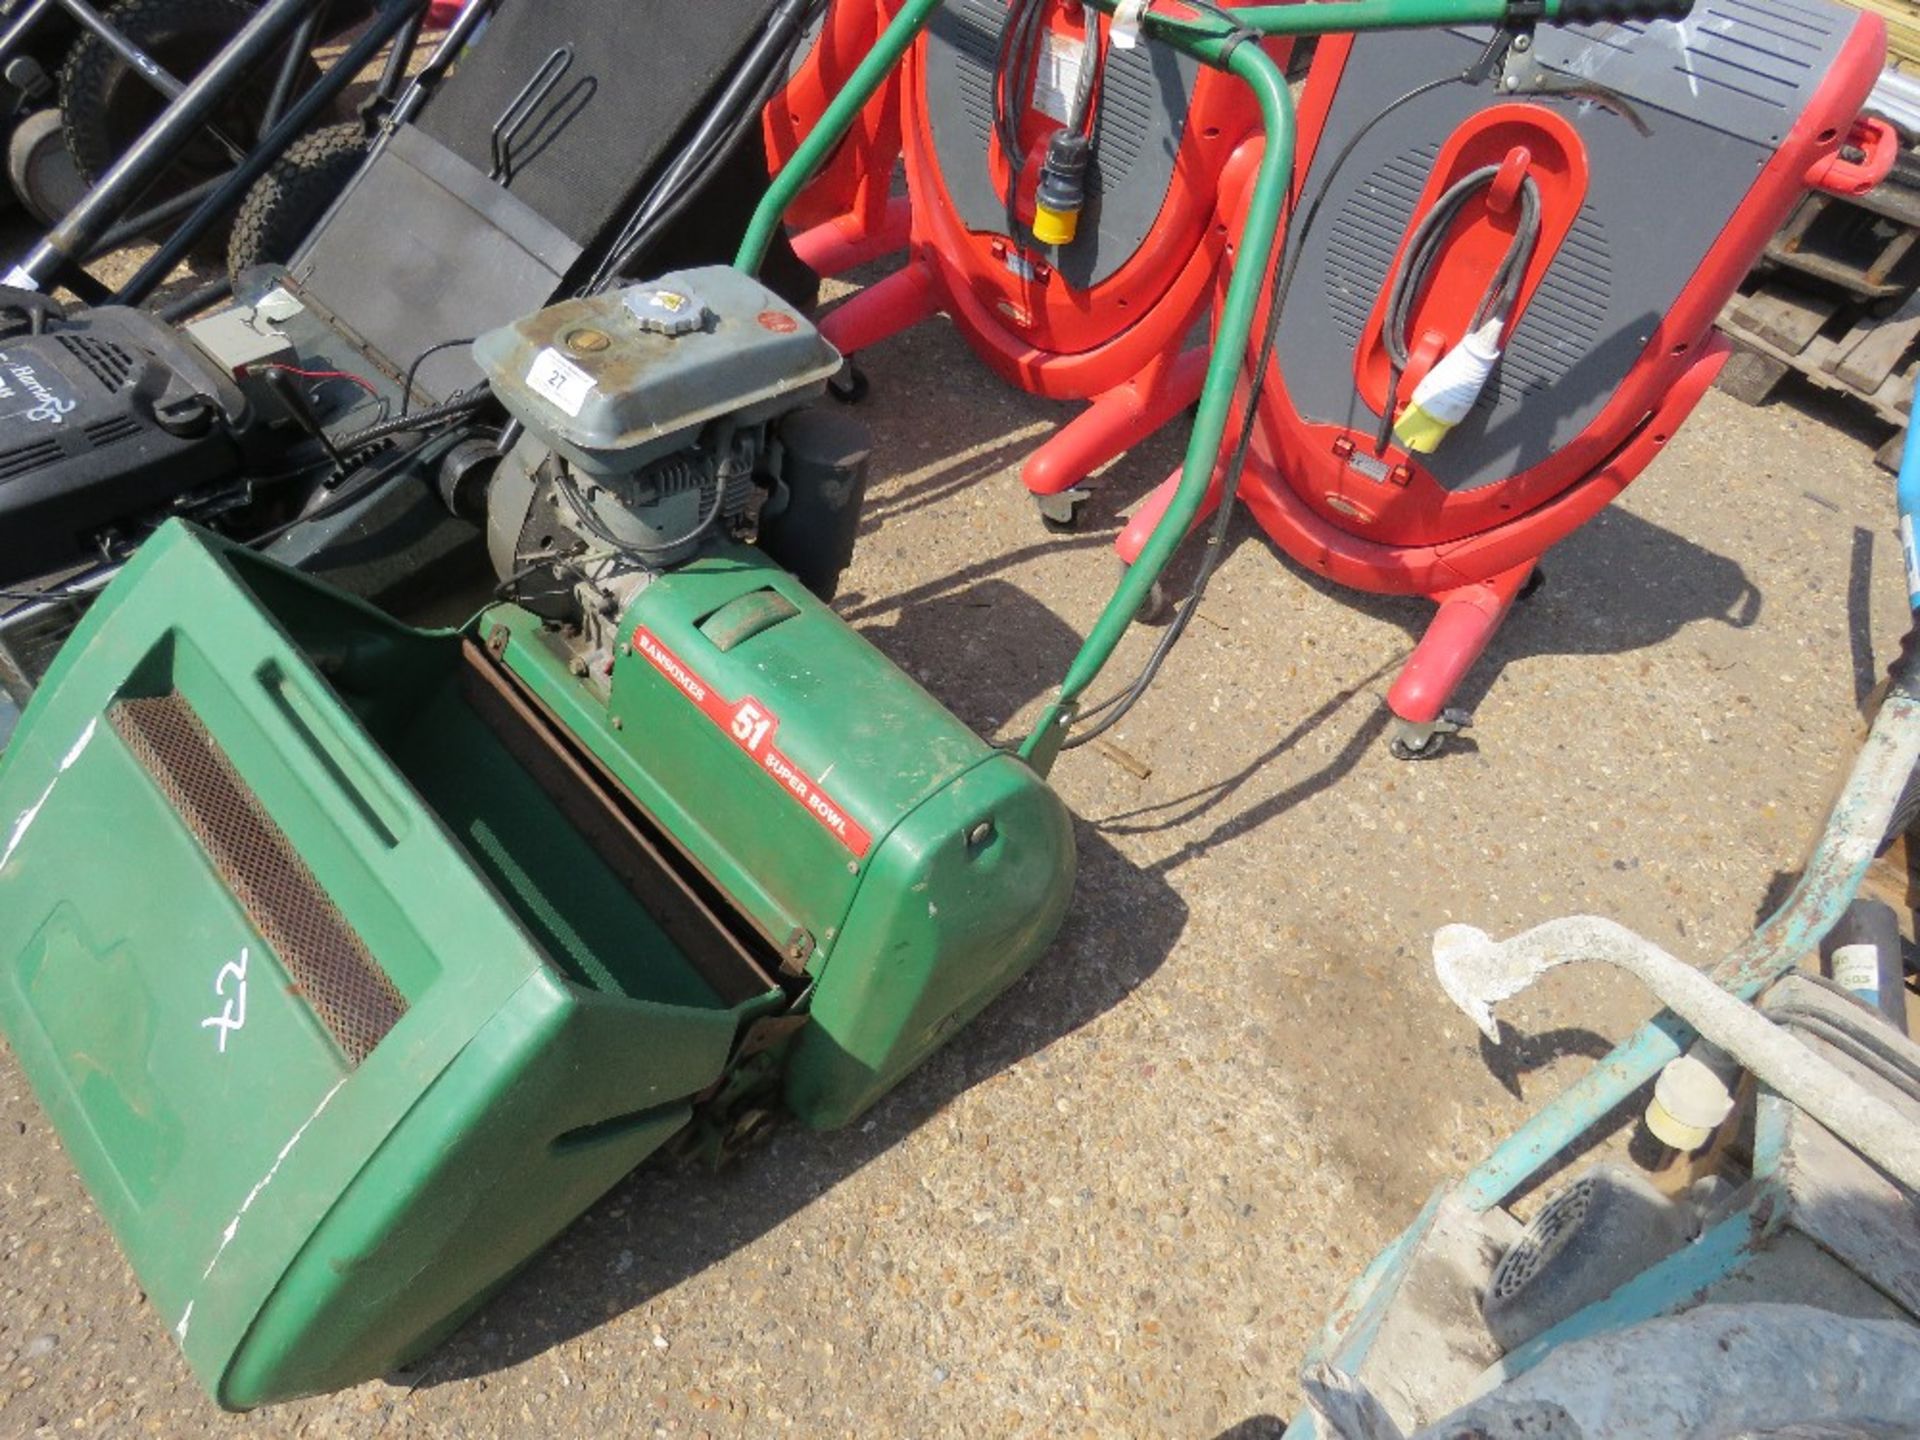 RANSOMES 51 SUPER BOWL CYLINDER MOWER WITH BOX - Image 2 of 3